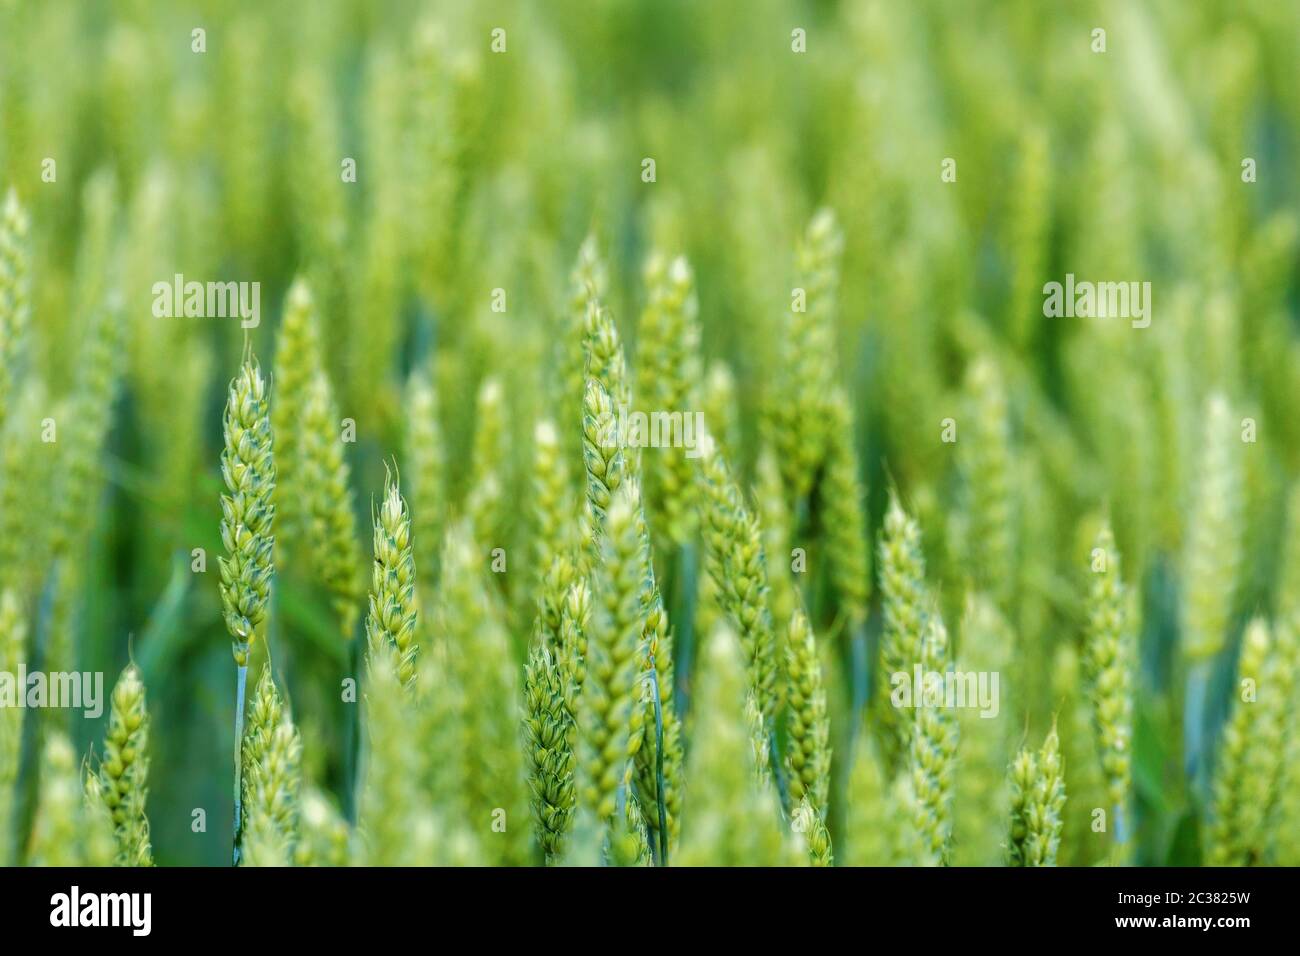 Young Wheat, Green Wheat Seedlings growing in a field Stock Photo